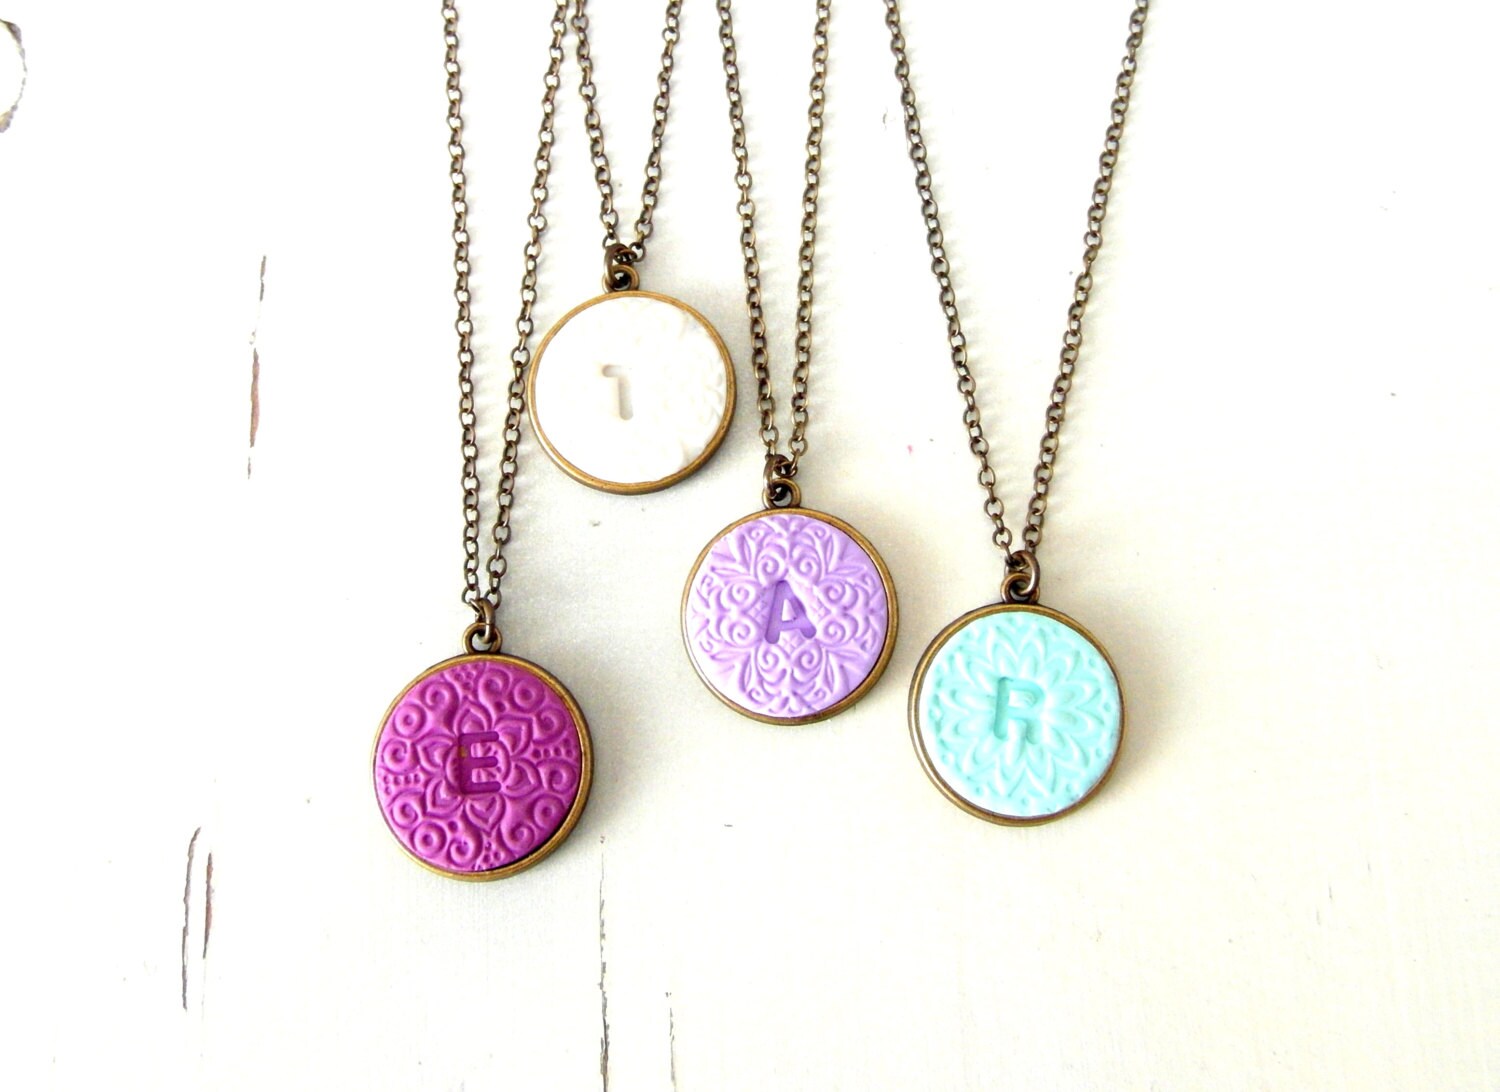 Personalized Initial Necklace custom Initial by ruthreizin